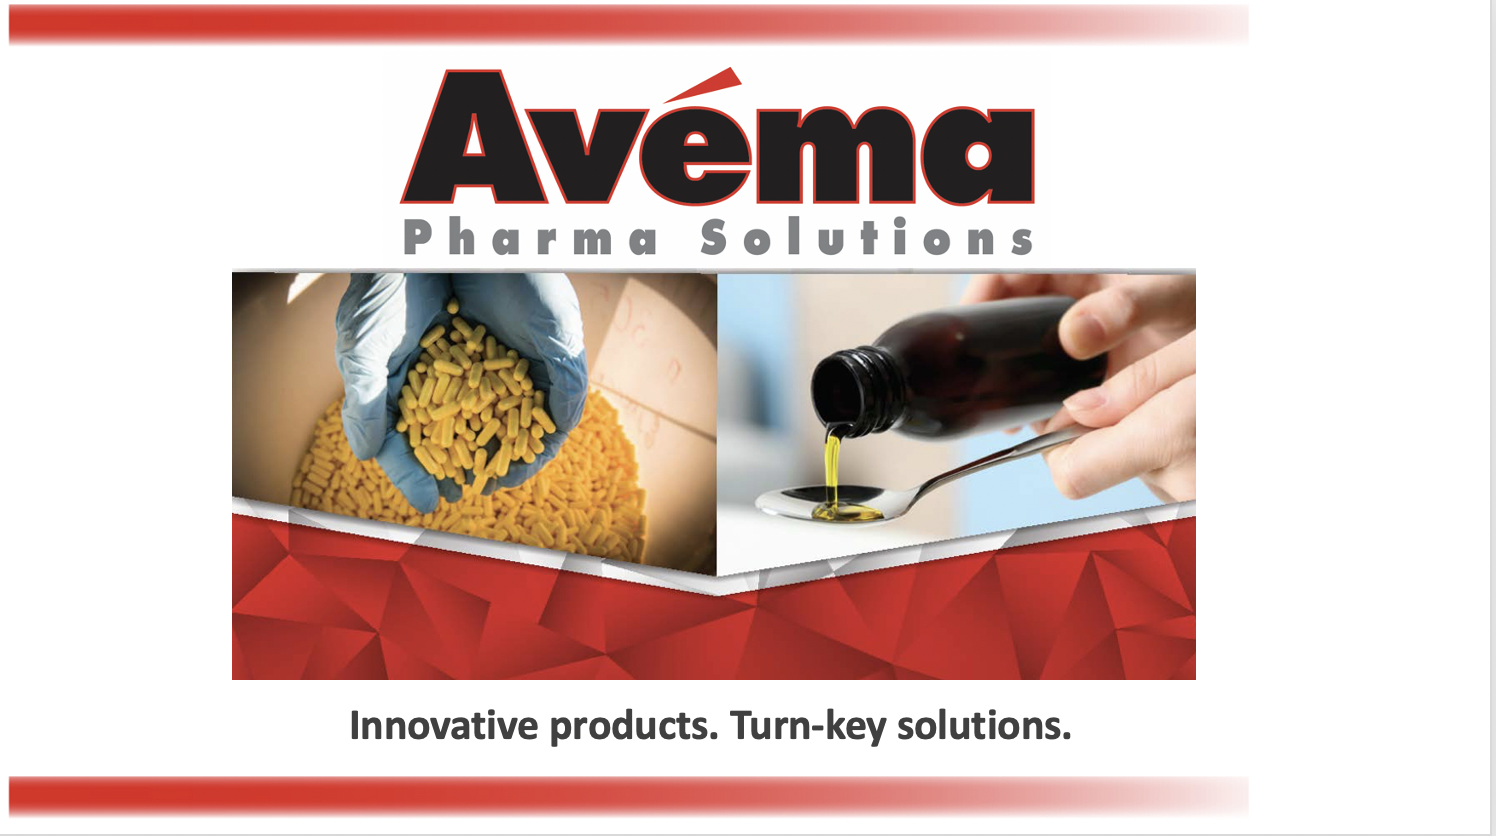 Avéma Pharma Solutions Manufacturing and R&D